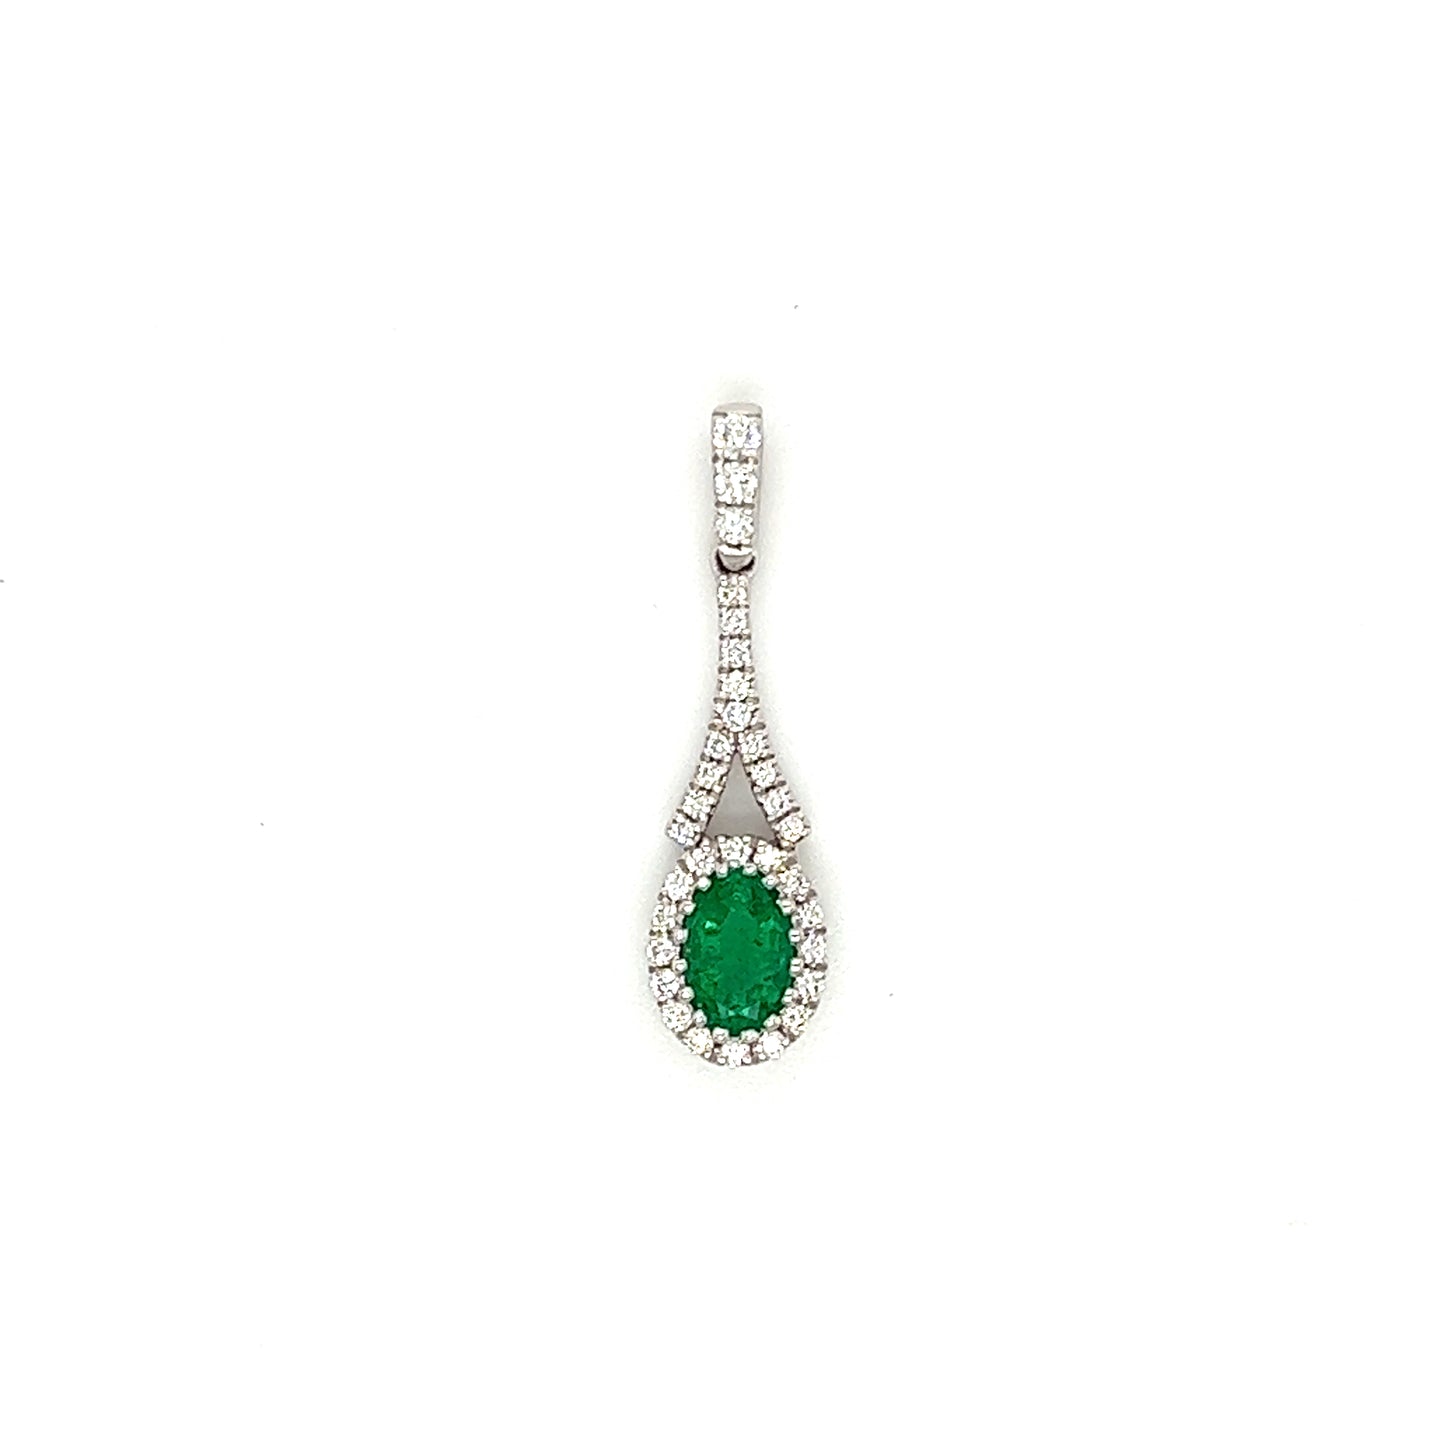 Oval Emerald Pendant with 32 Diamonds in 18K White Gold Pendant View